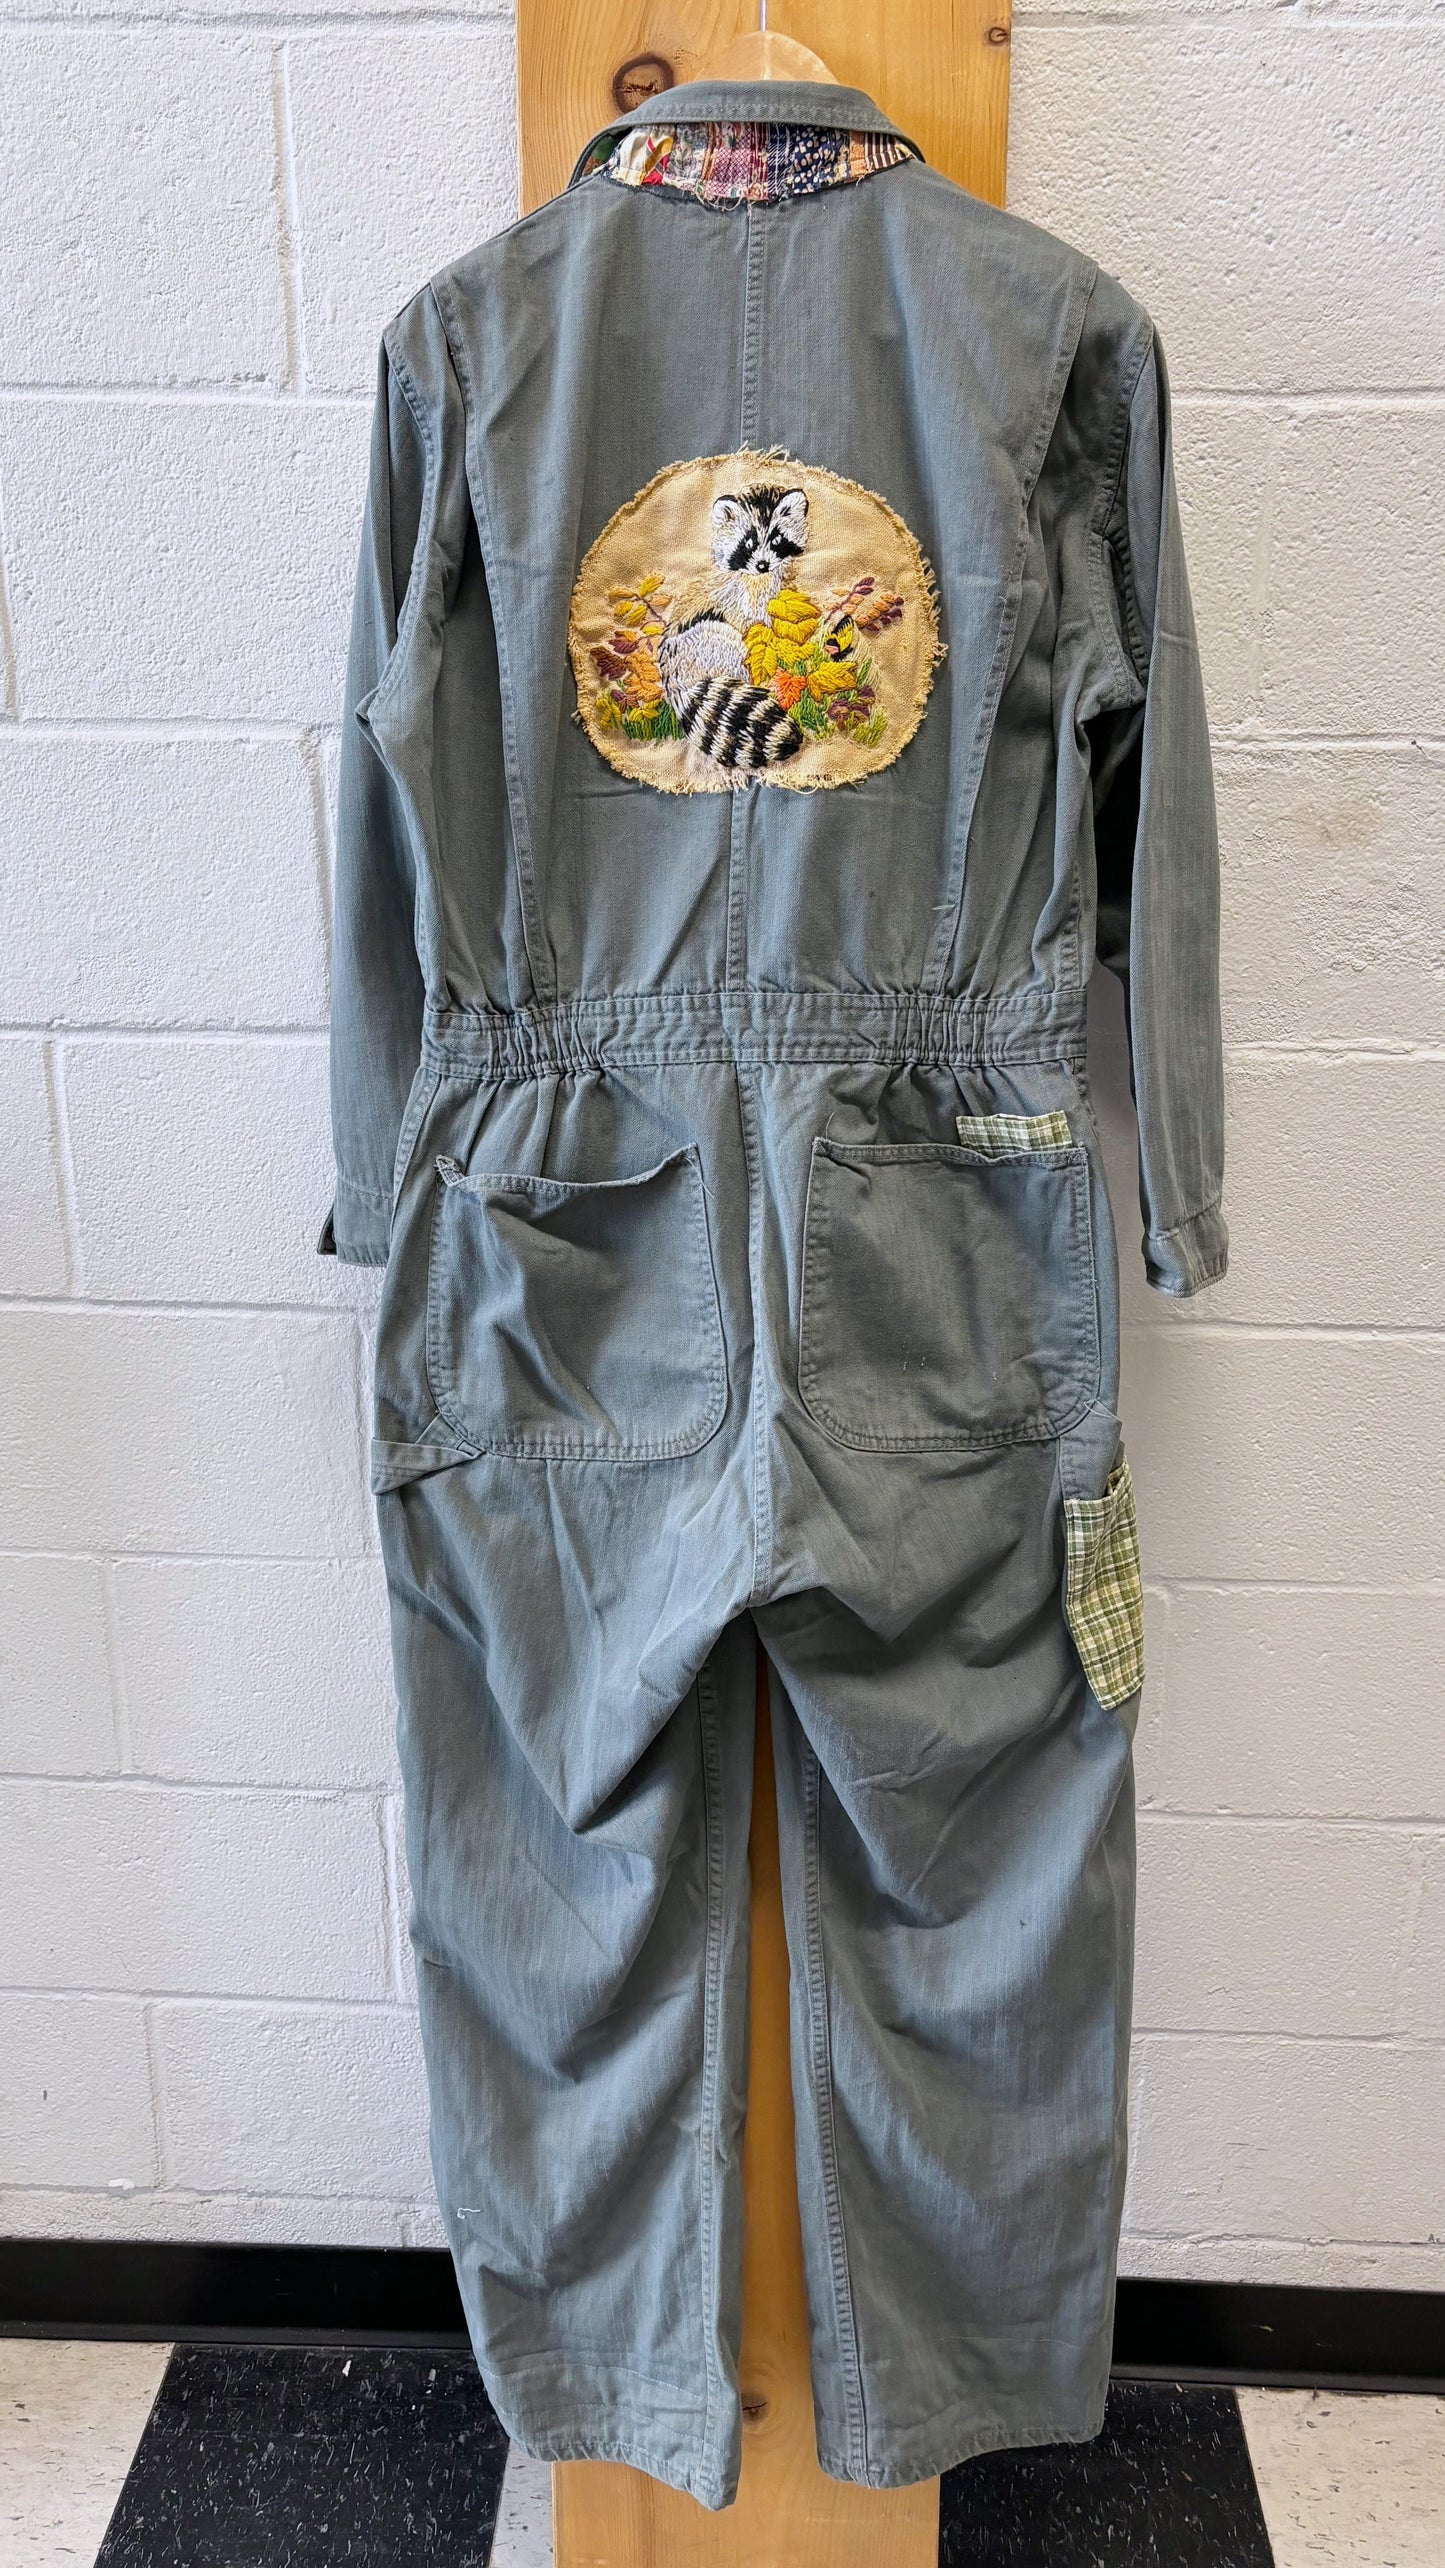 WHSE479 Exclusive Reworked Coveralls : 40 R